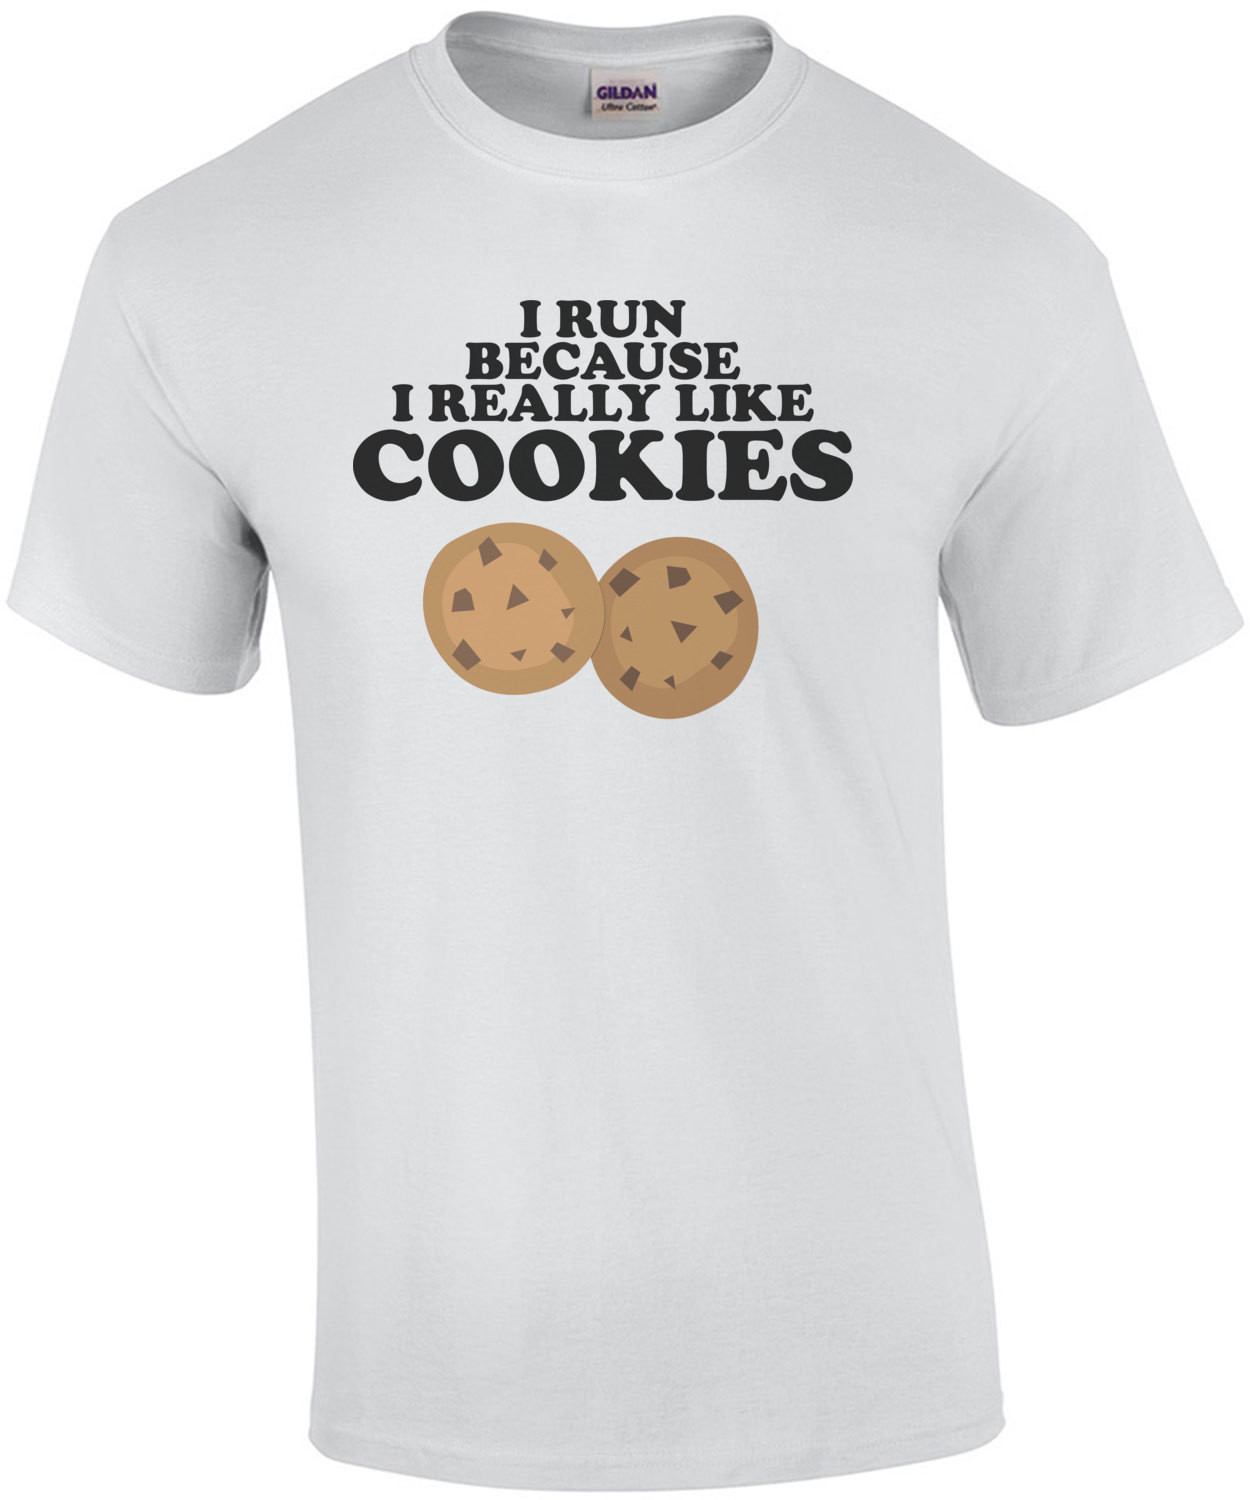 I run because I really like cookies - funny exercise t-shirt